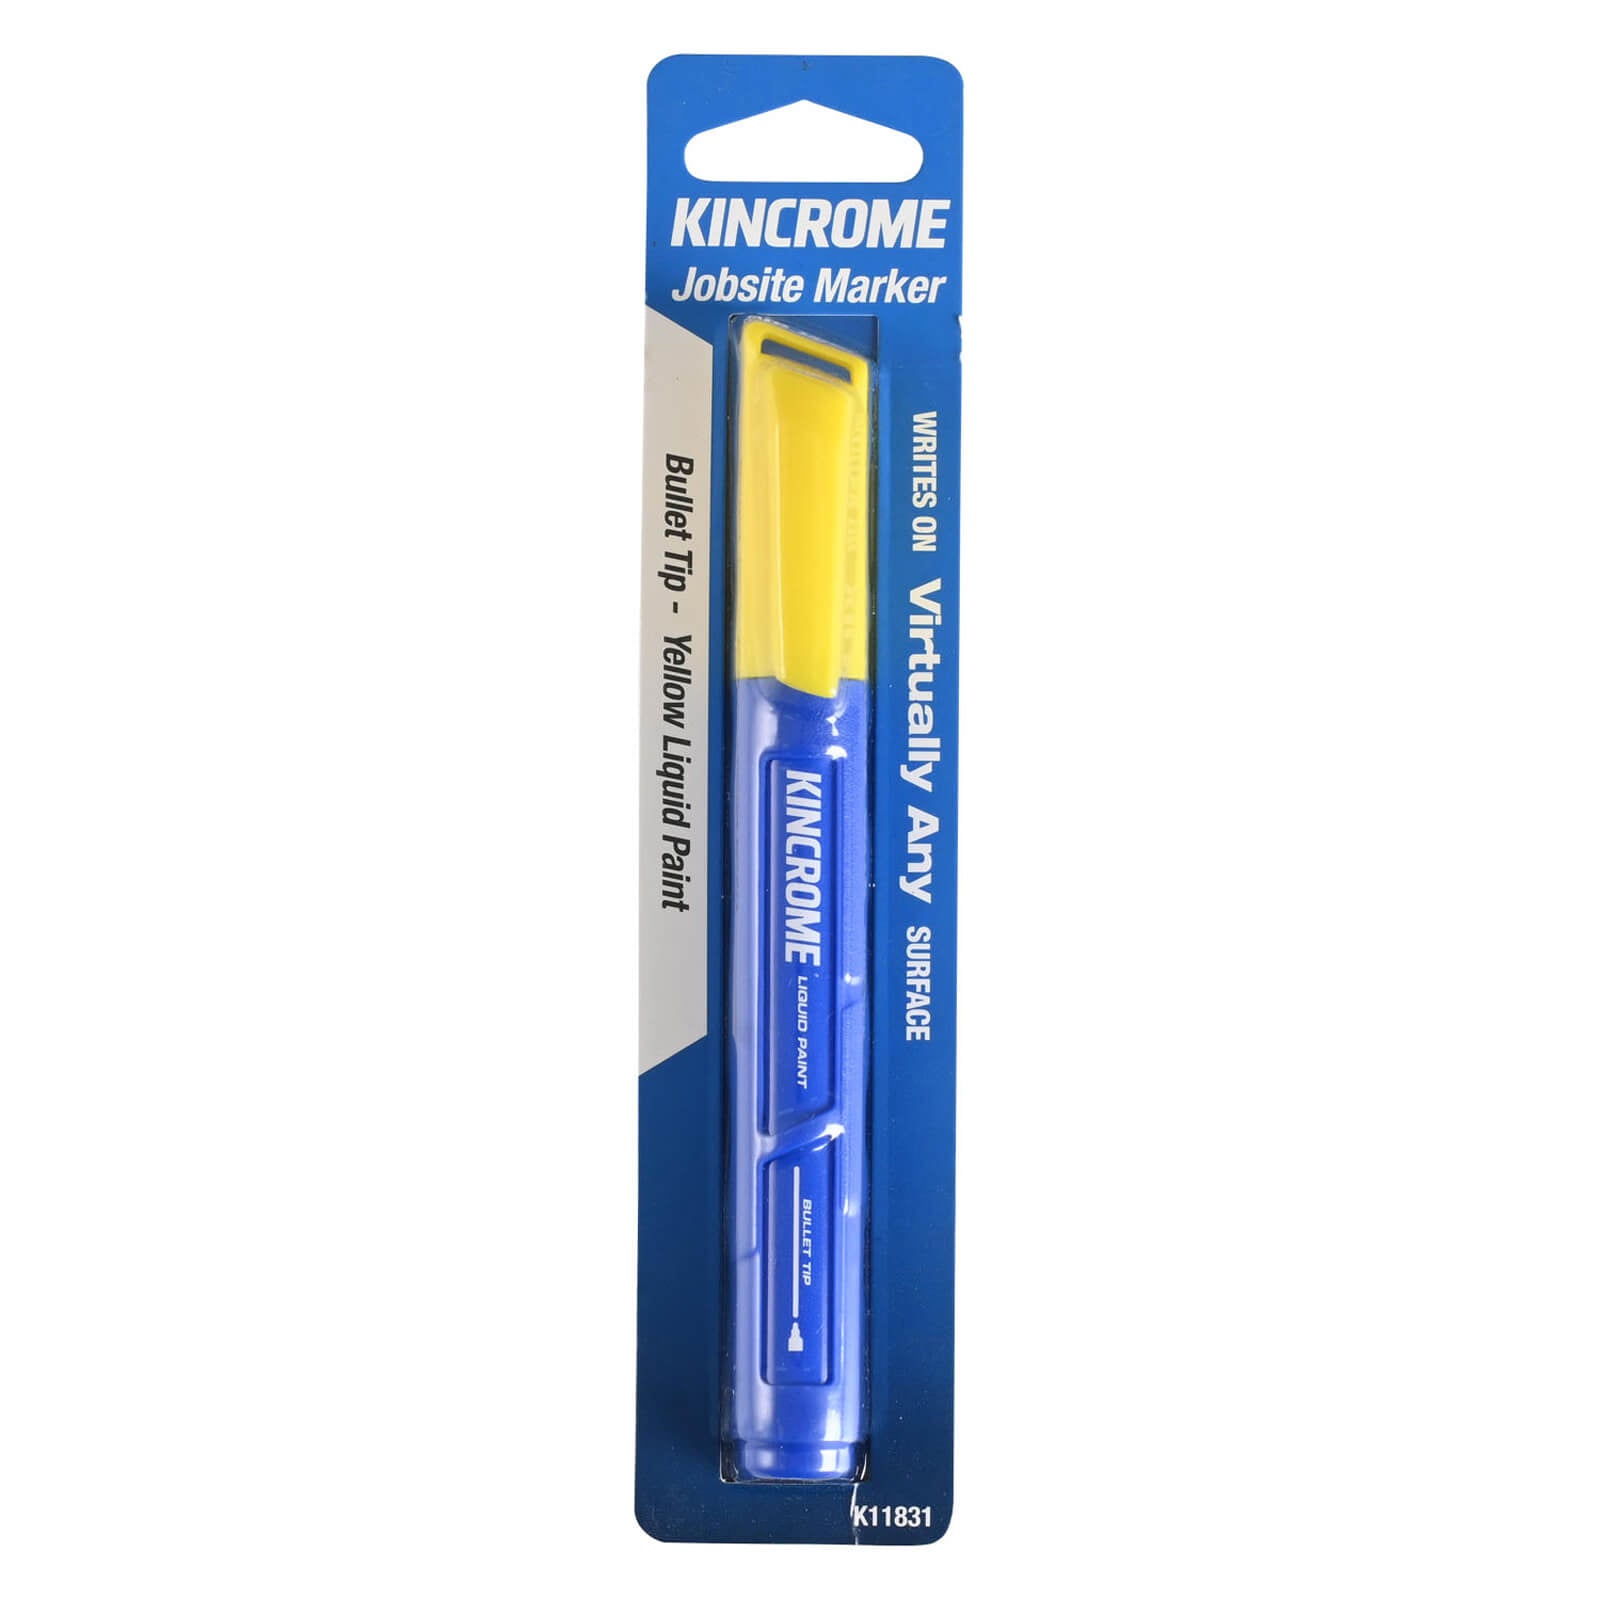 Paint Marker Bullet Tip Yellow - K11831 by Kincrome